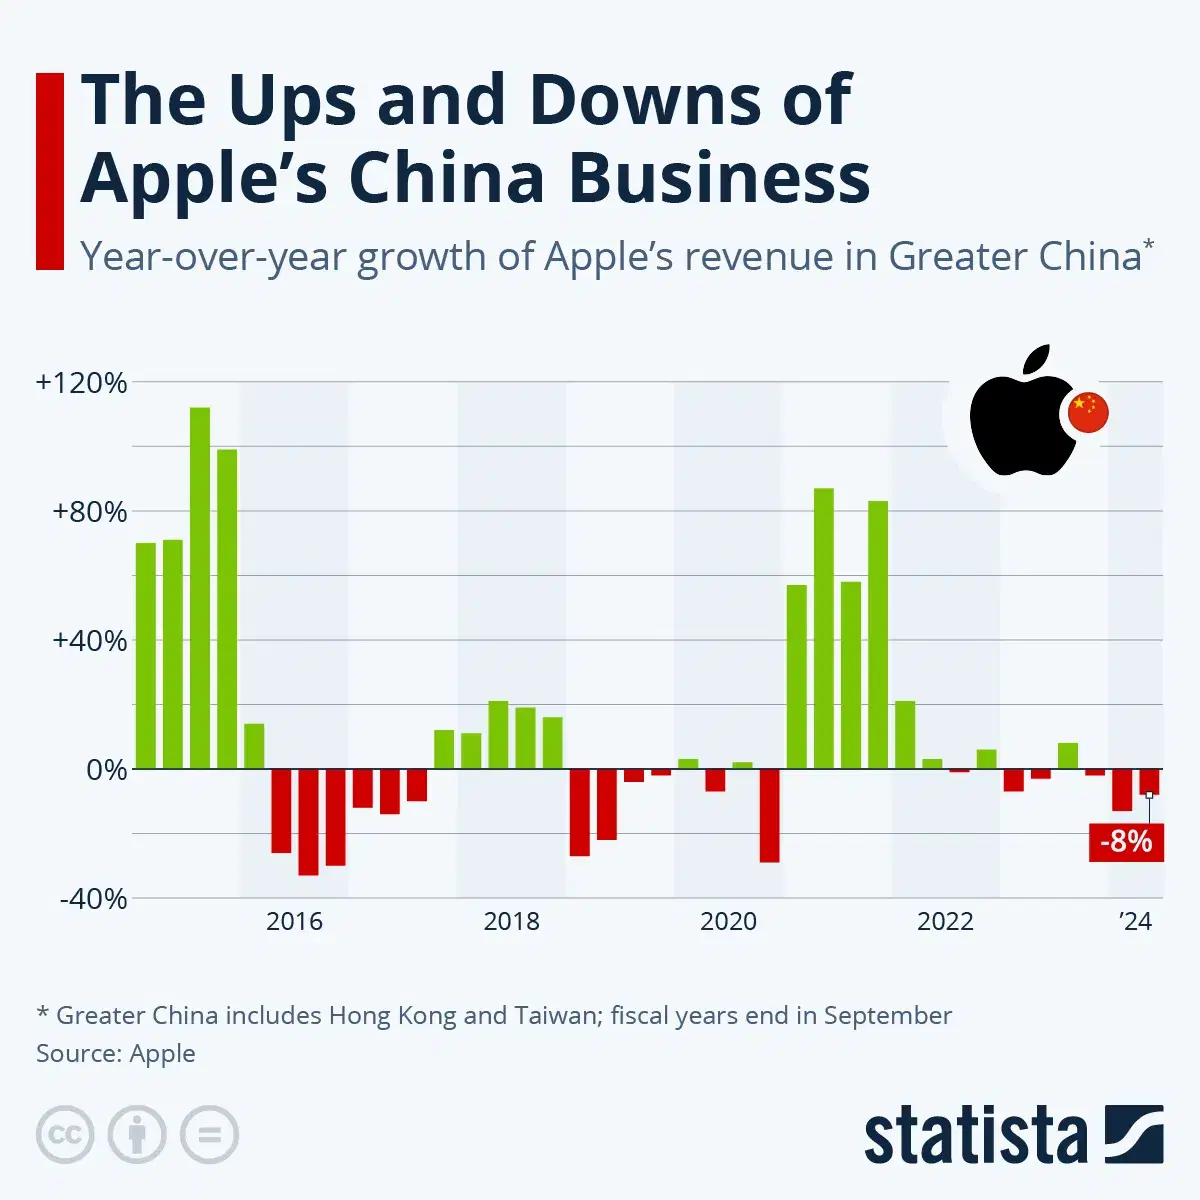 The Ups and Downs of Apple's China Business